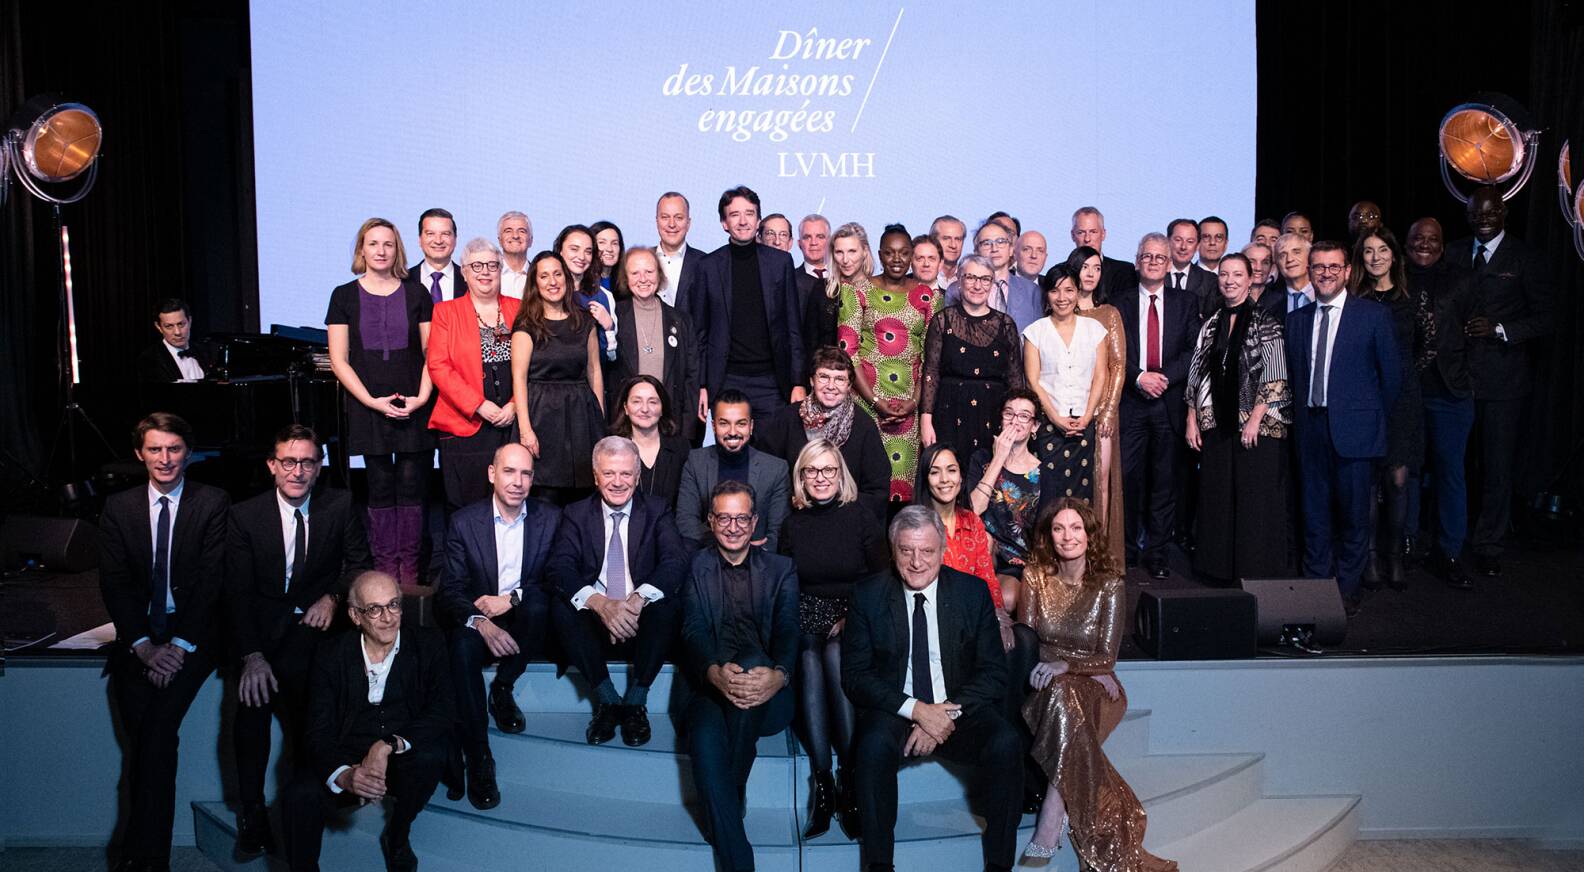 LVMH holds 7th edition of the LVMH Dîner des Maisons Engagées, highlighting  a year of active support for social solidarity - LVMH